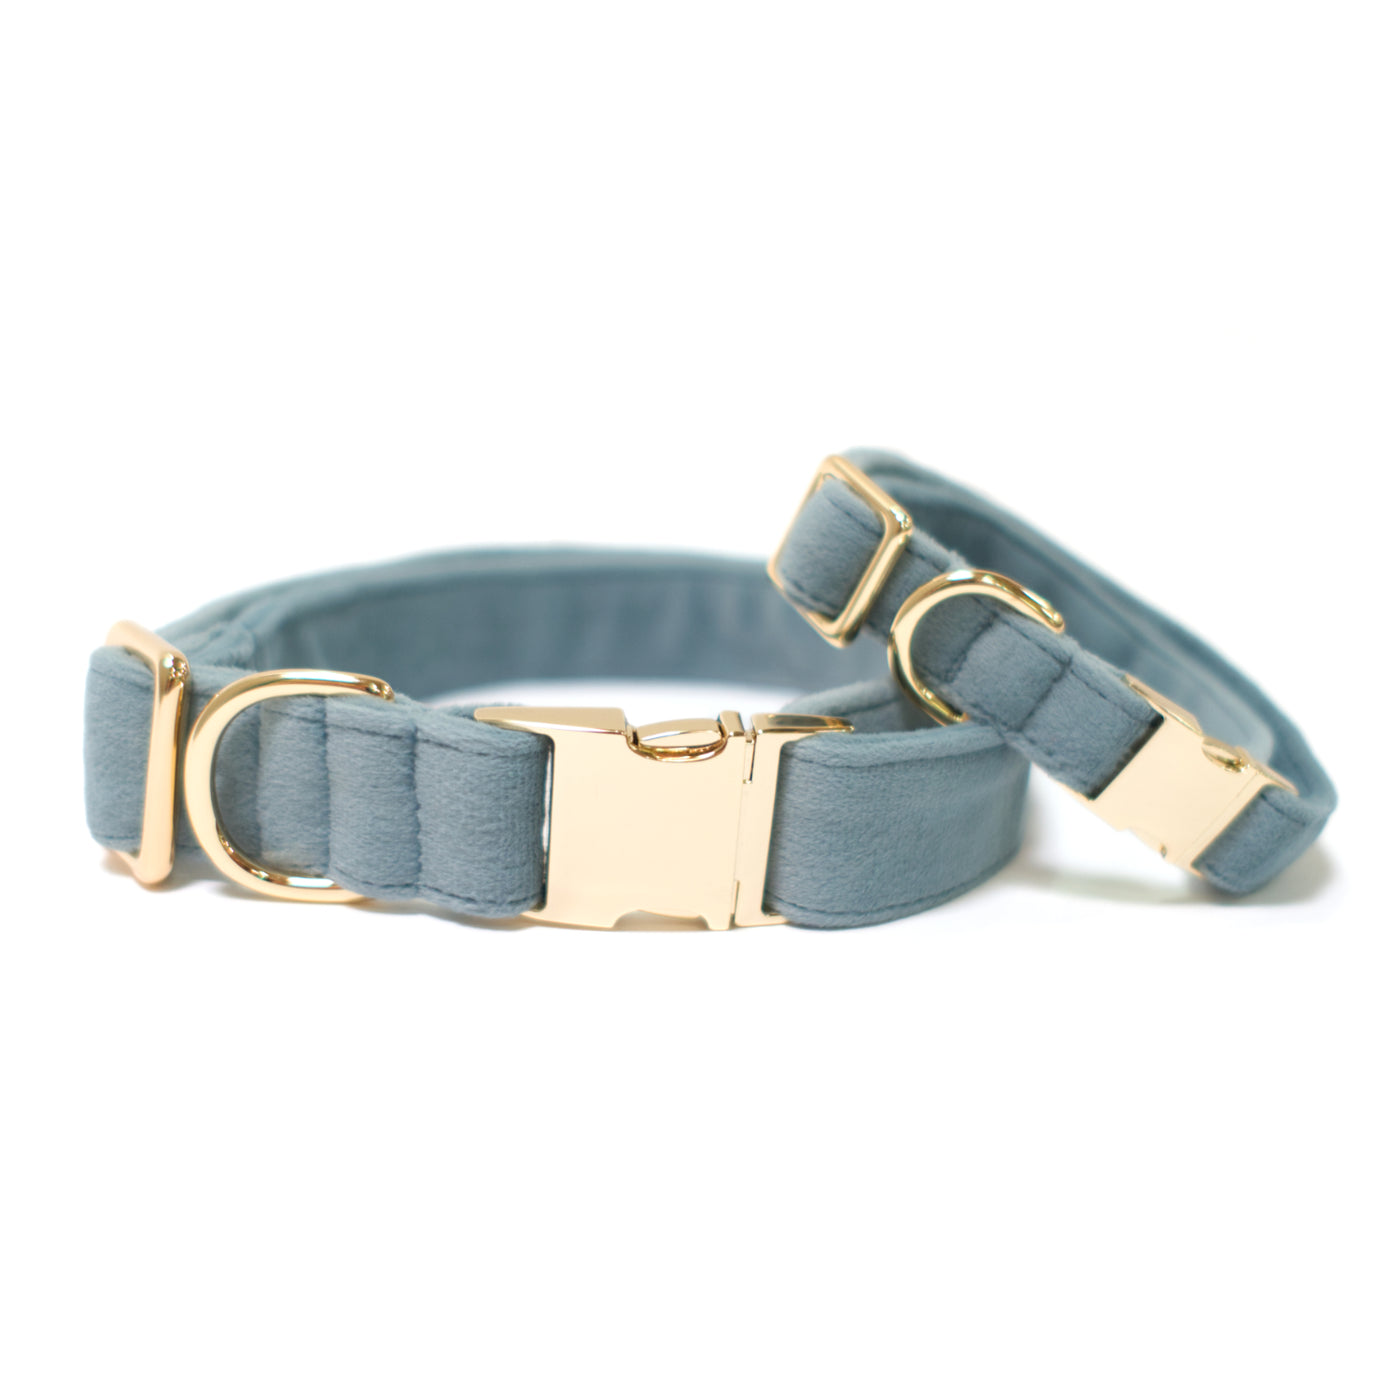 River blue velvet dog collar with bold hardware pictured in two sizes